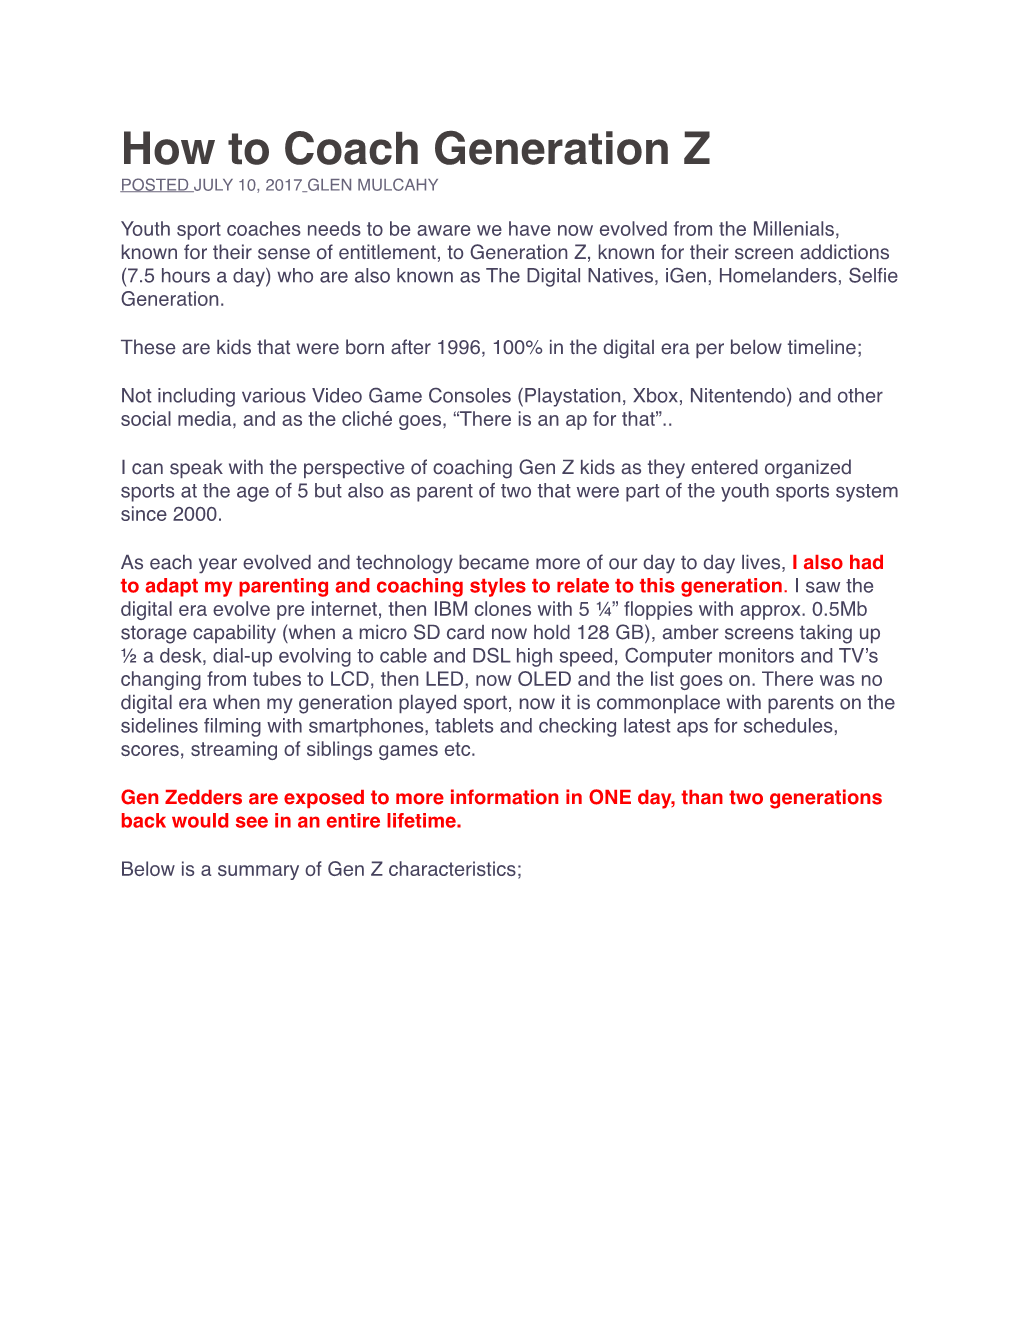 How-To-Coach-Generation-Z FINAL